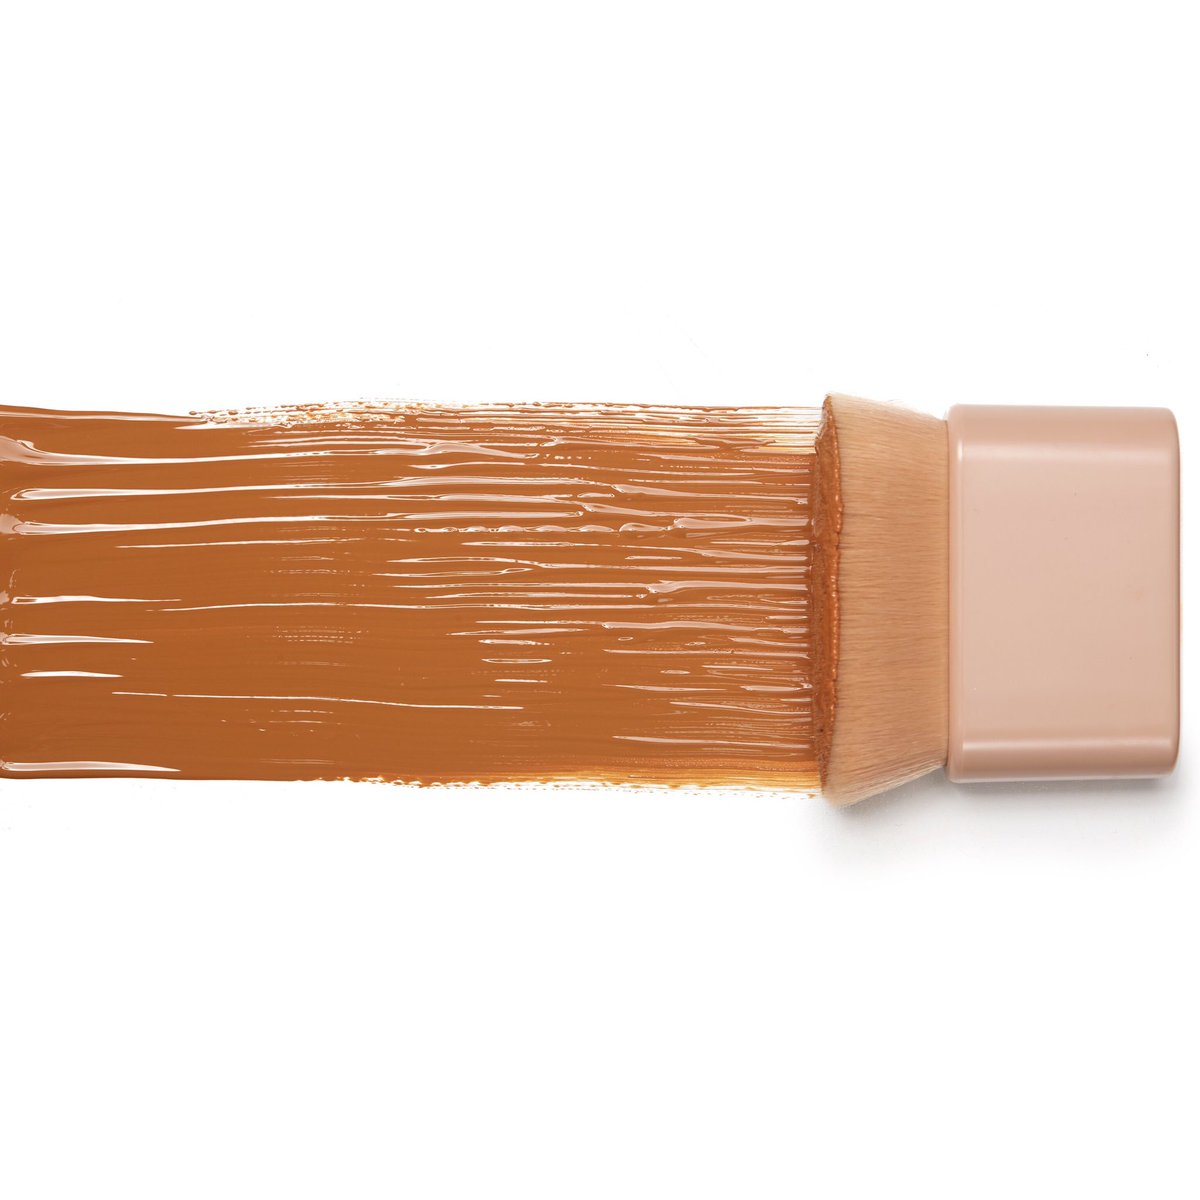 RT @kkwbeauty: Shop the #KKWBEAUTY Body Foundation in the shades Tan & Deep Dark today at https://t.co/32qaKbs5YG ✨ https://t.co/VGKcobxRed